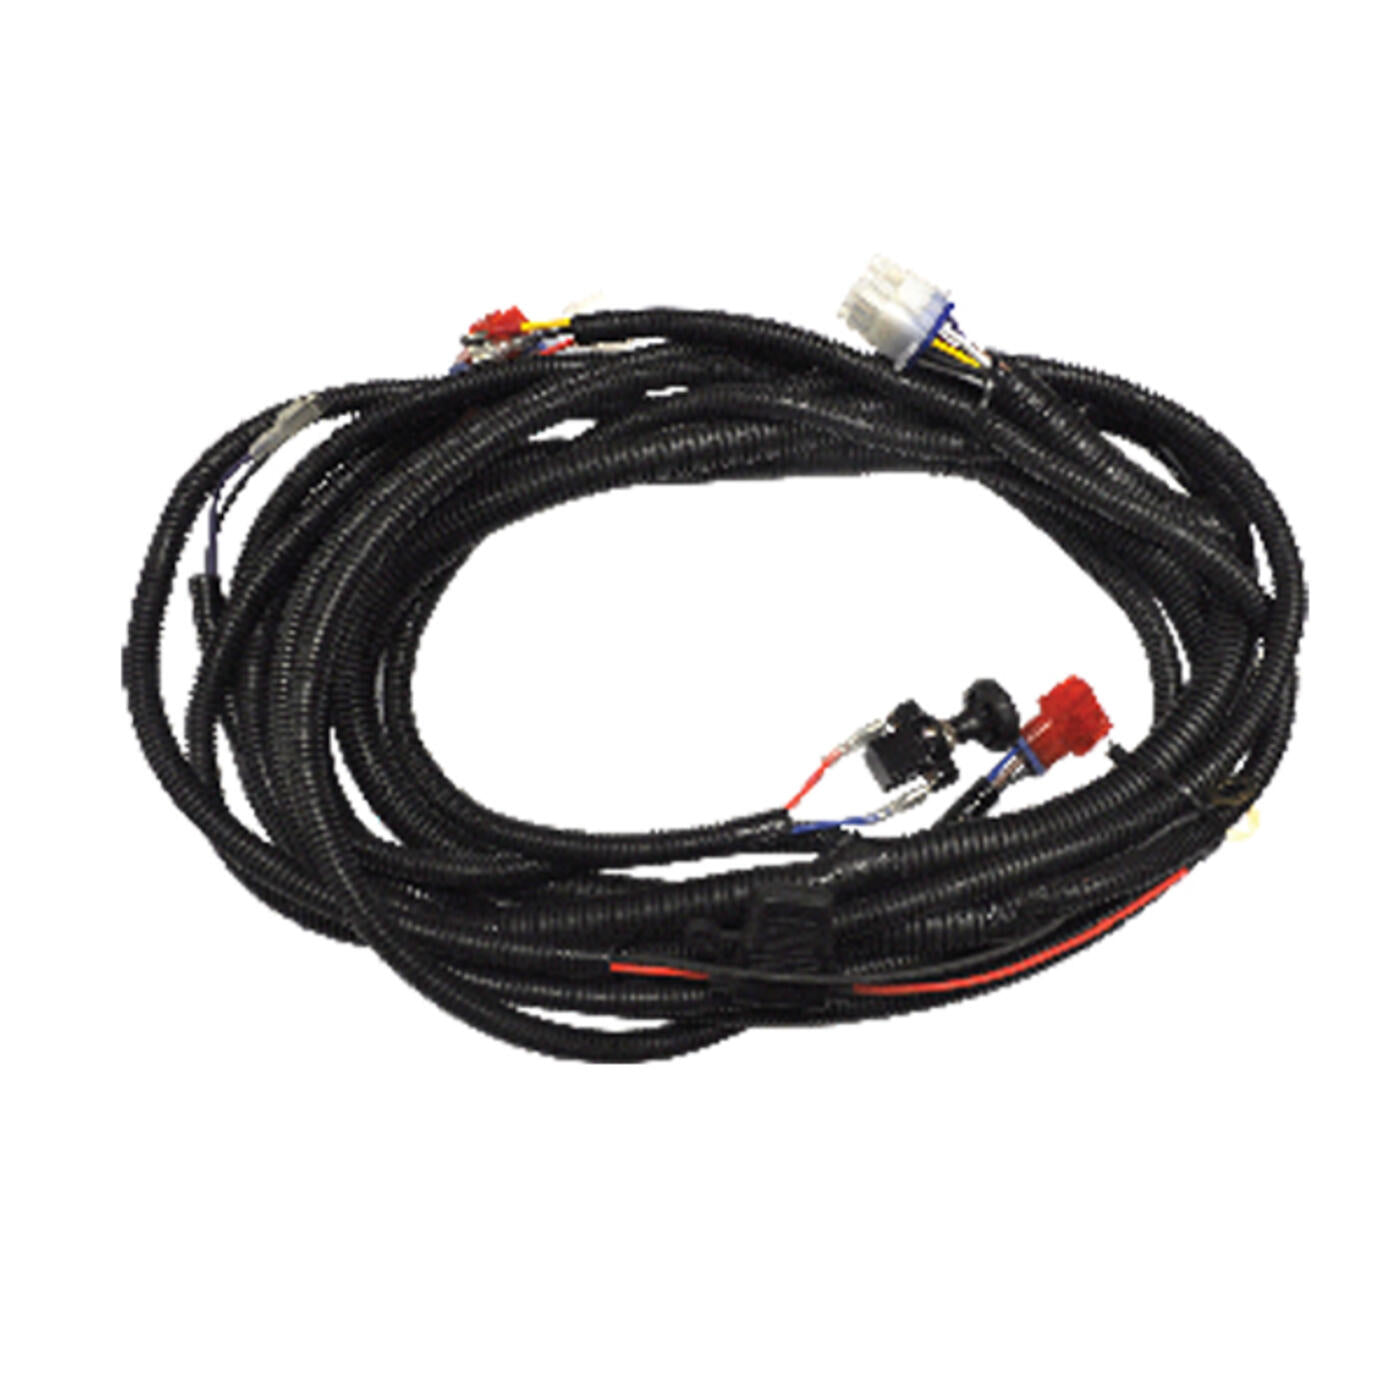 GTW Ultimate Light Kit Wiring Harness 02-125